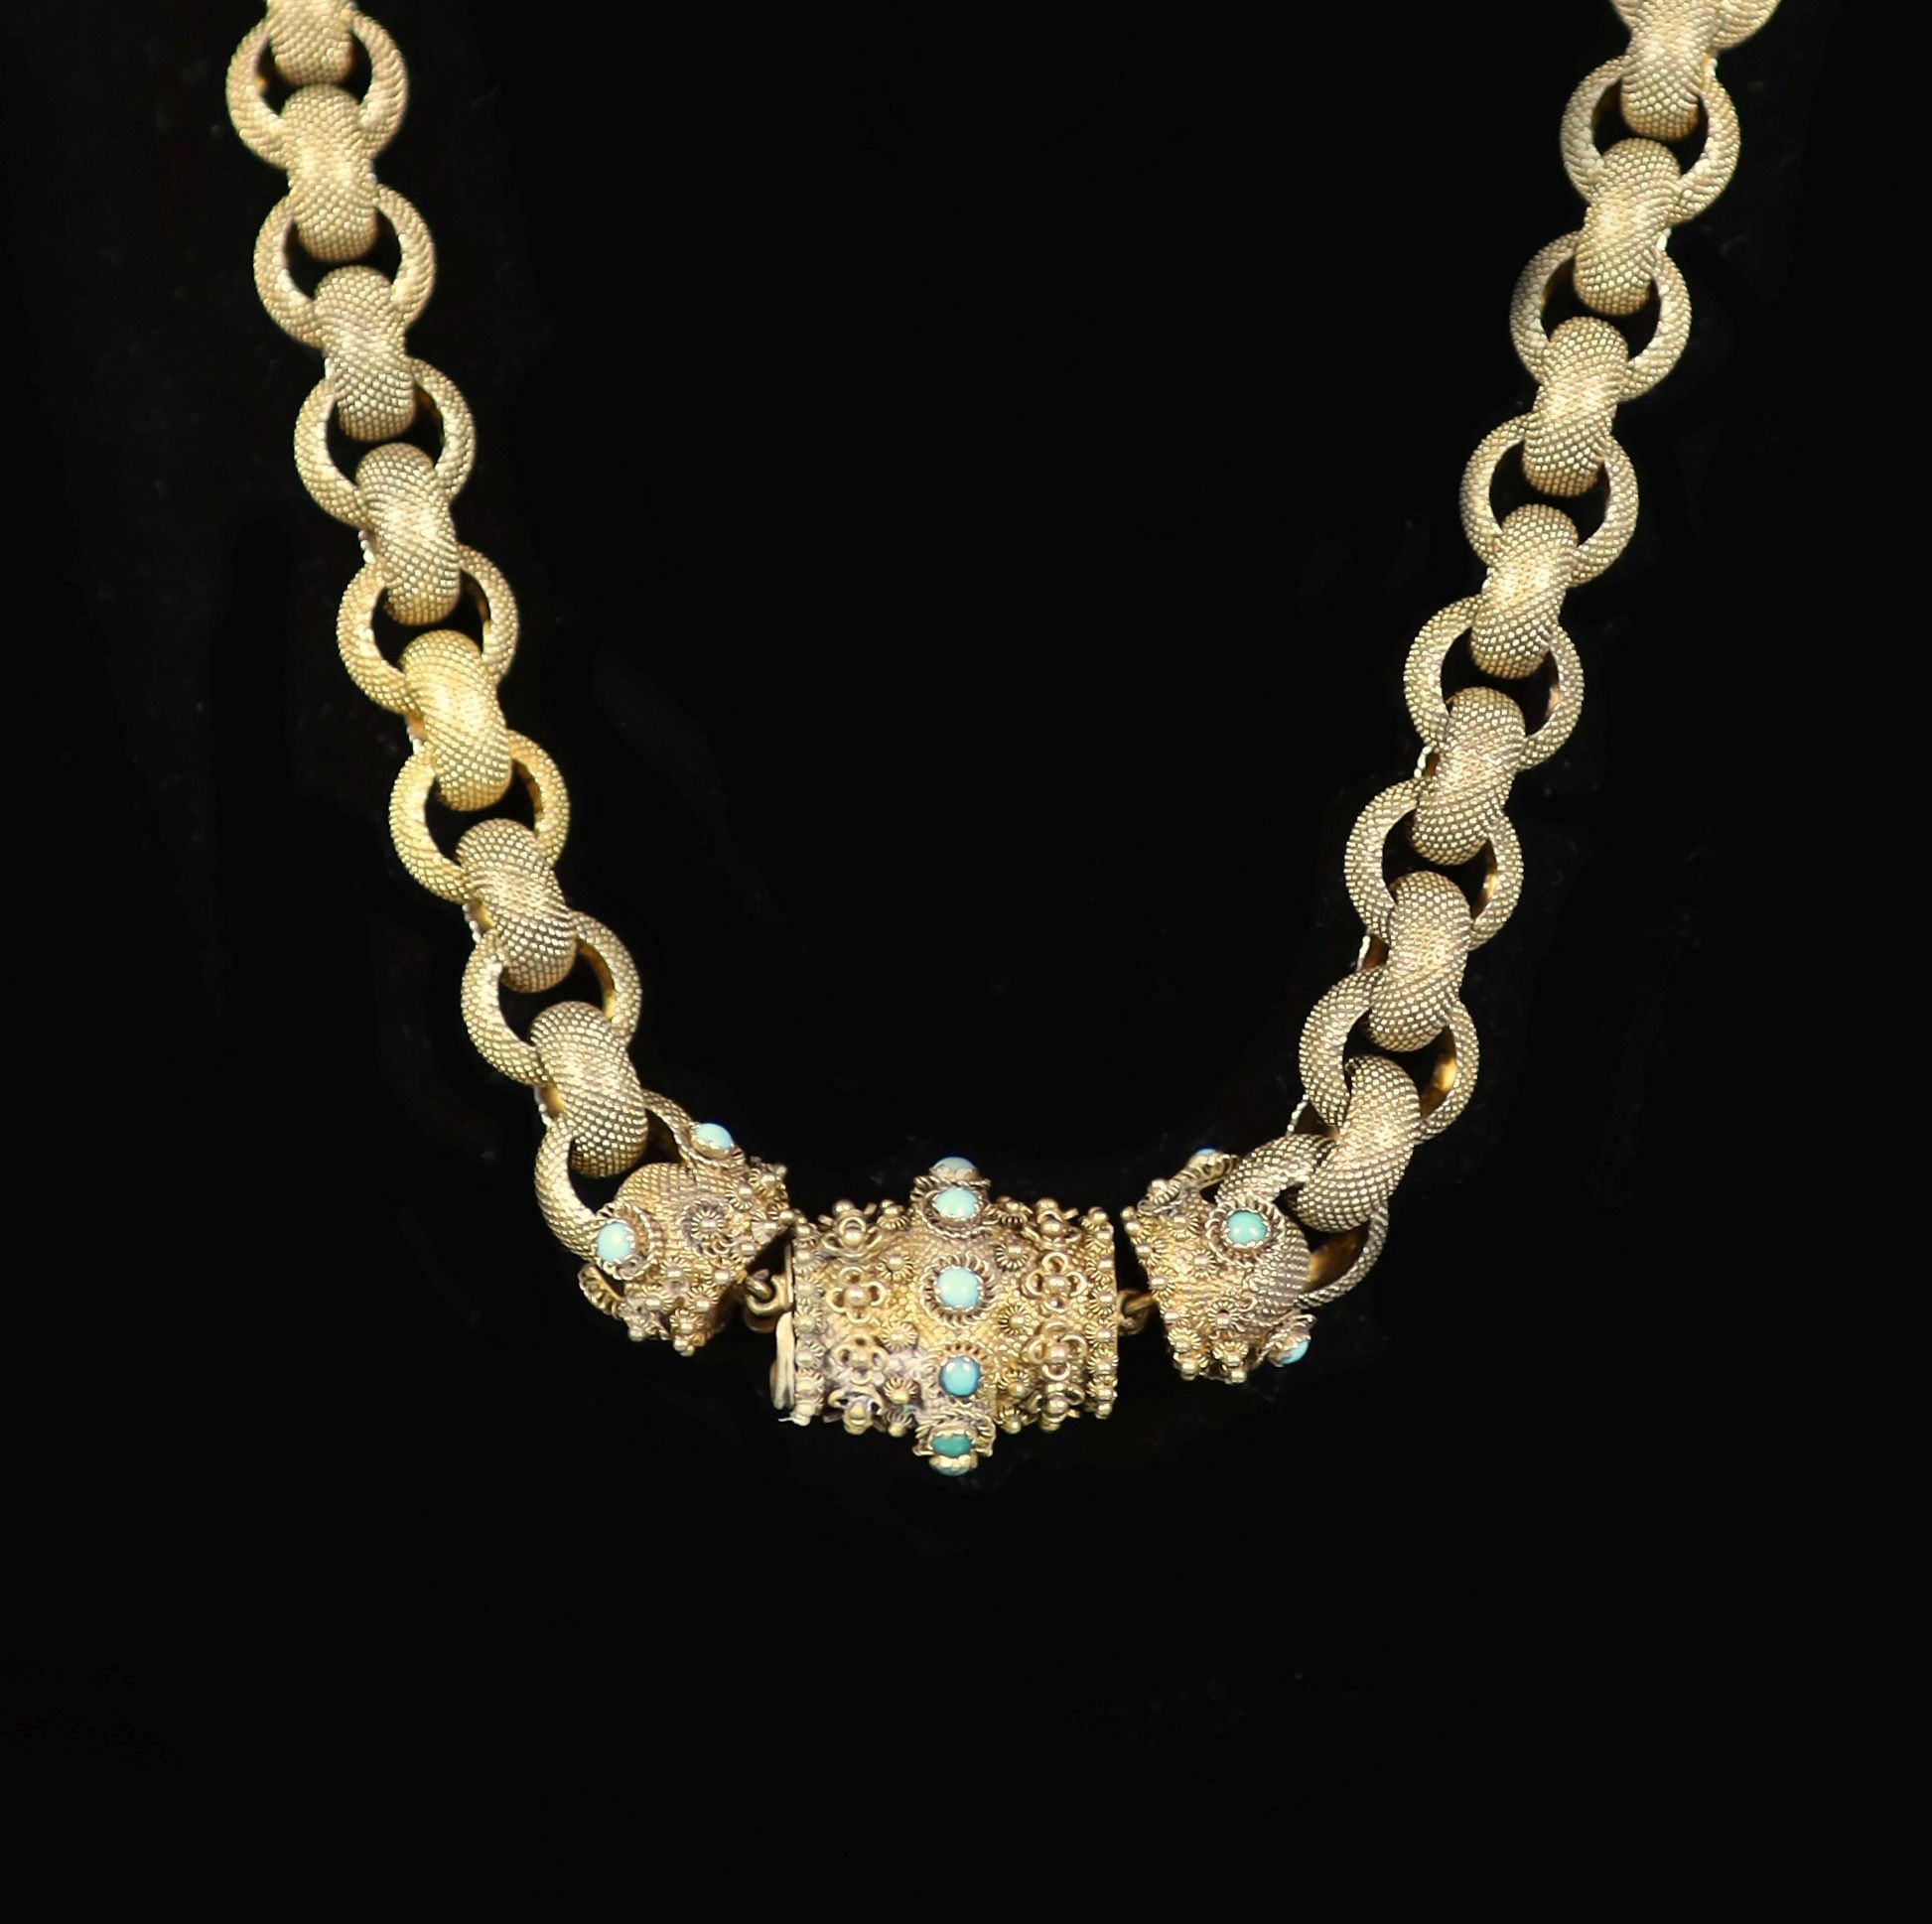 An early 19th century textured gold circular link muff chain, with turquoise set and cannetille work barrel shaped clasp